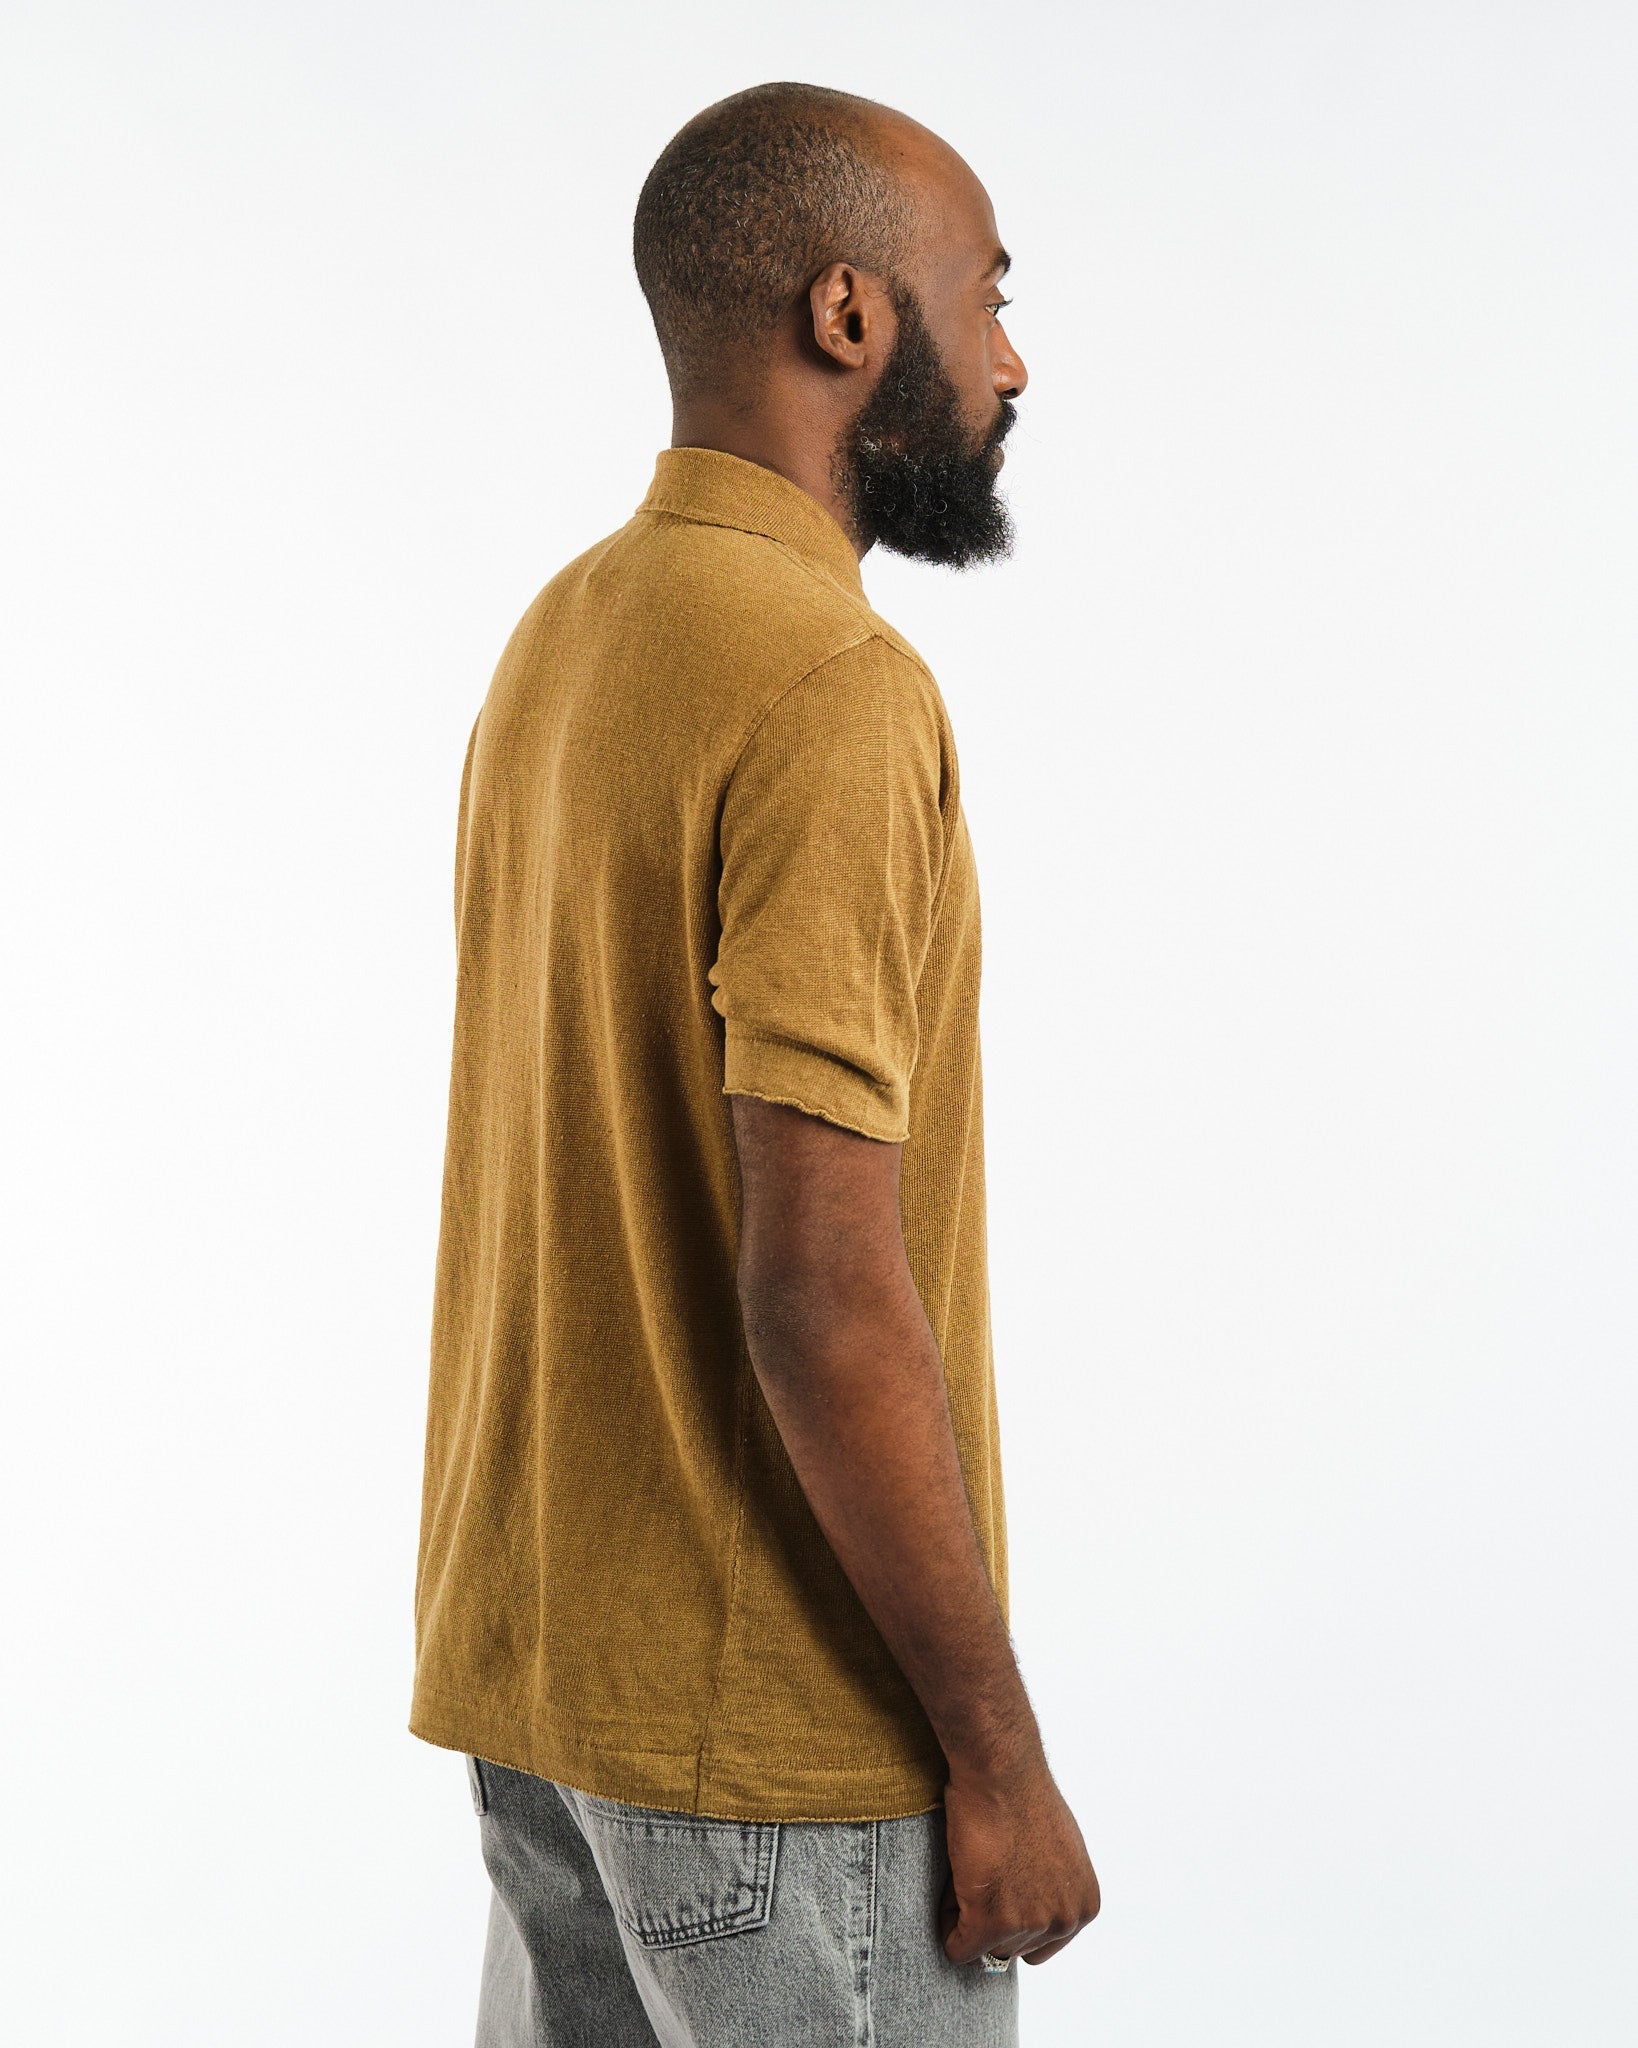 Polo Short Sleeve 2 Buttons Tabacco - Meadow